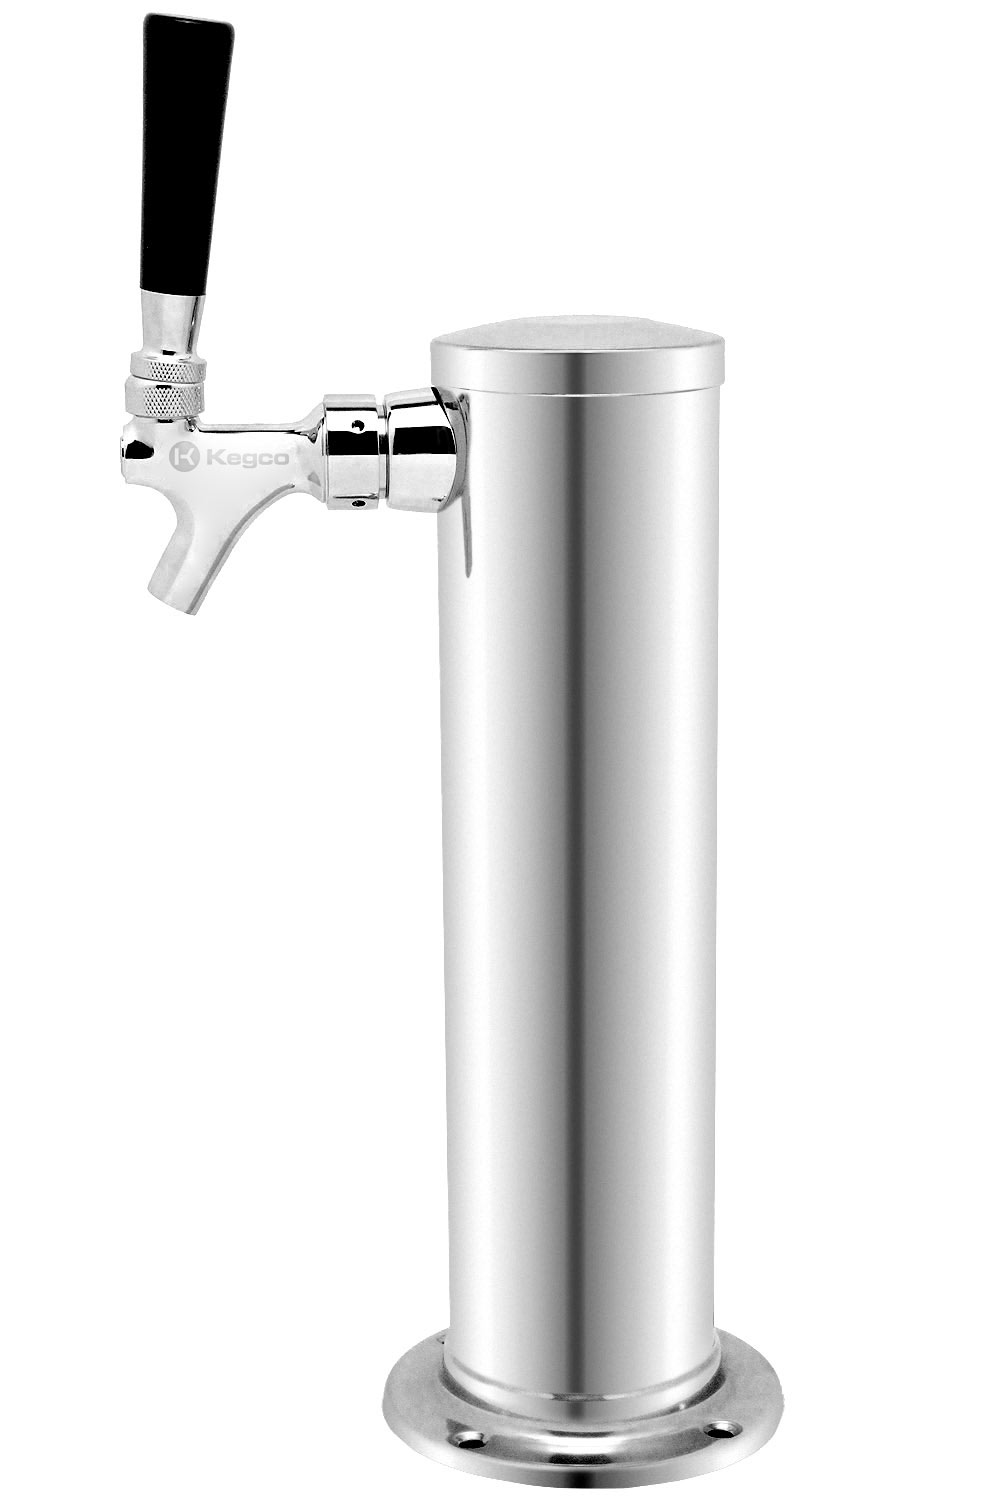 Details about   NEW KEGCO 3" SS SINGLE FAUCET TOWER POLISHED STAINLESS STEEL MODEL DT1F-145S 